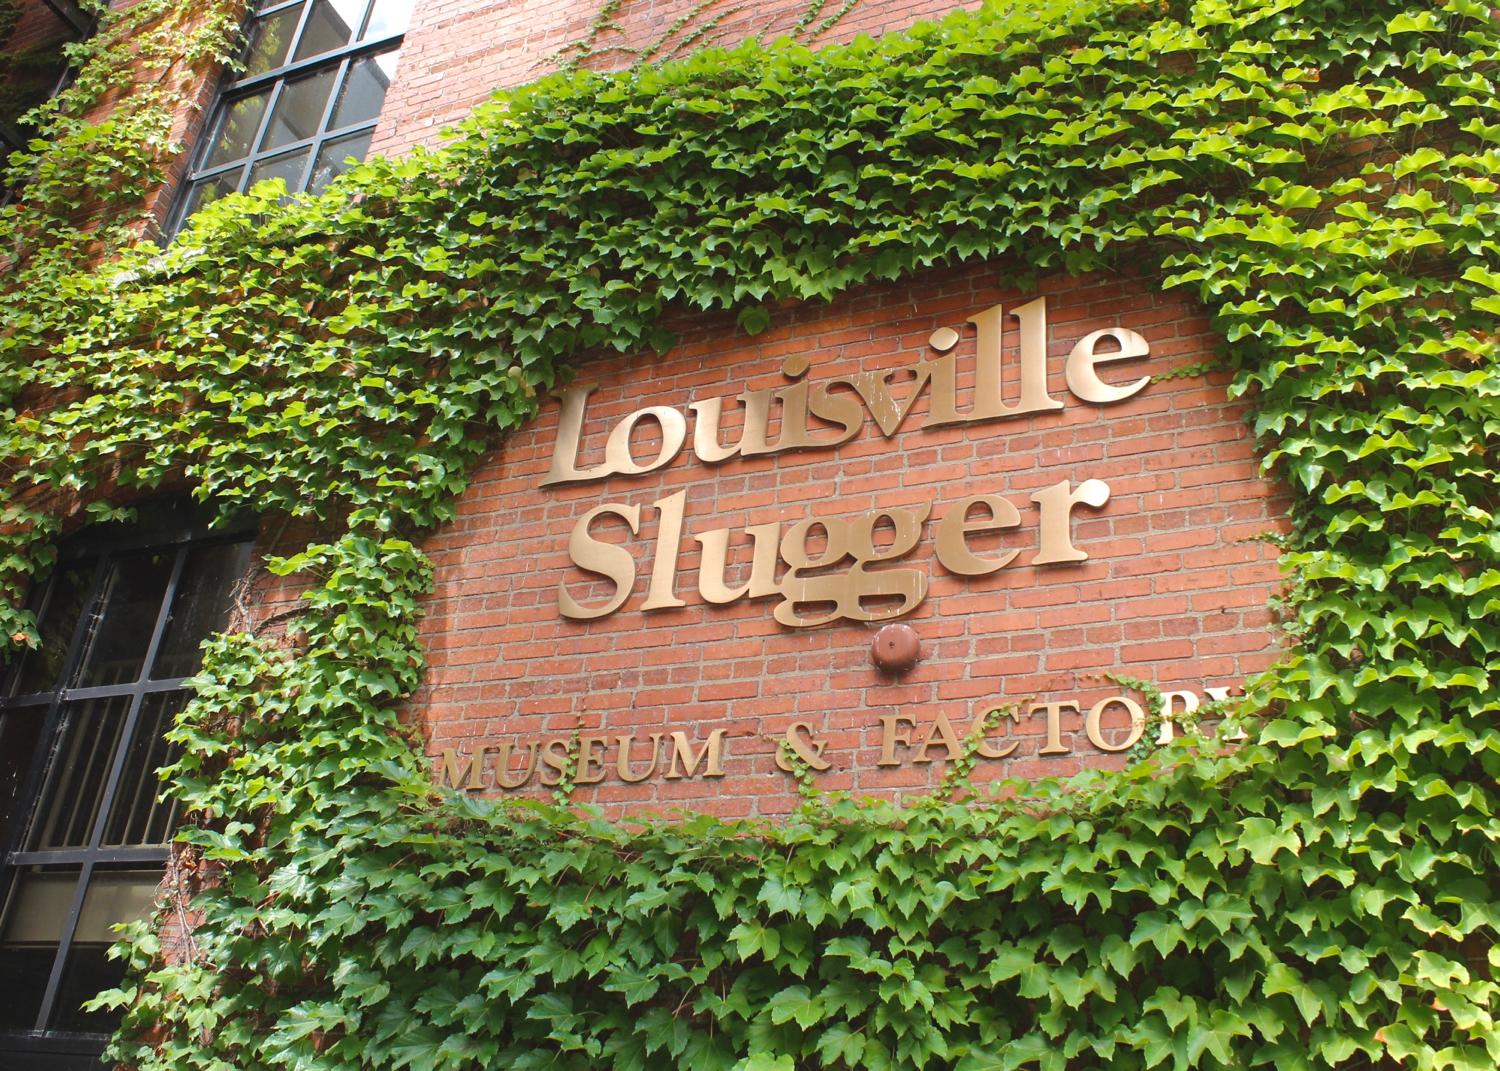 If You Love Baseball, Then A Trip To The Louisville Slugger Museum Is A Must | Cincinnati Refined